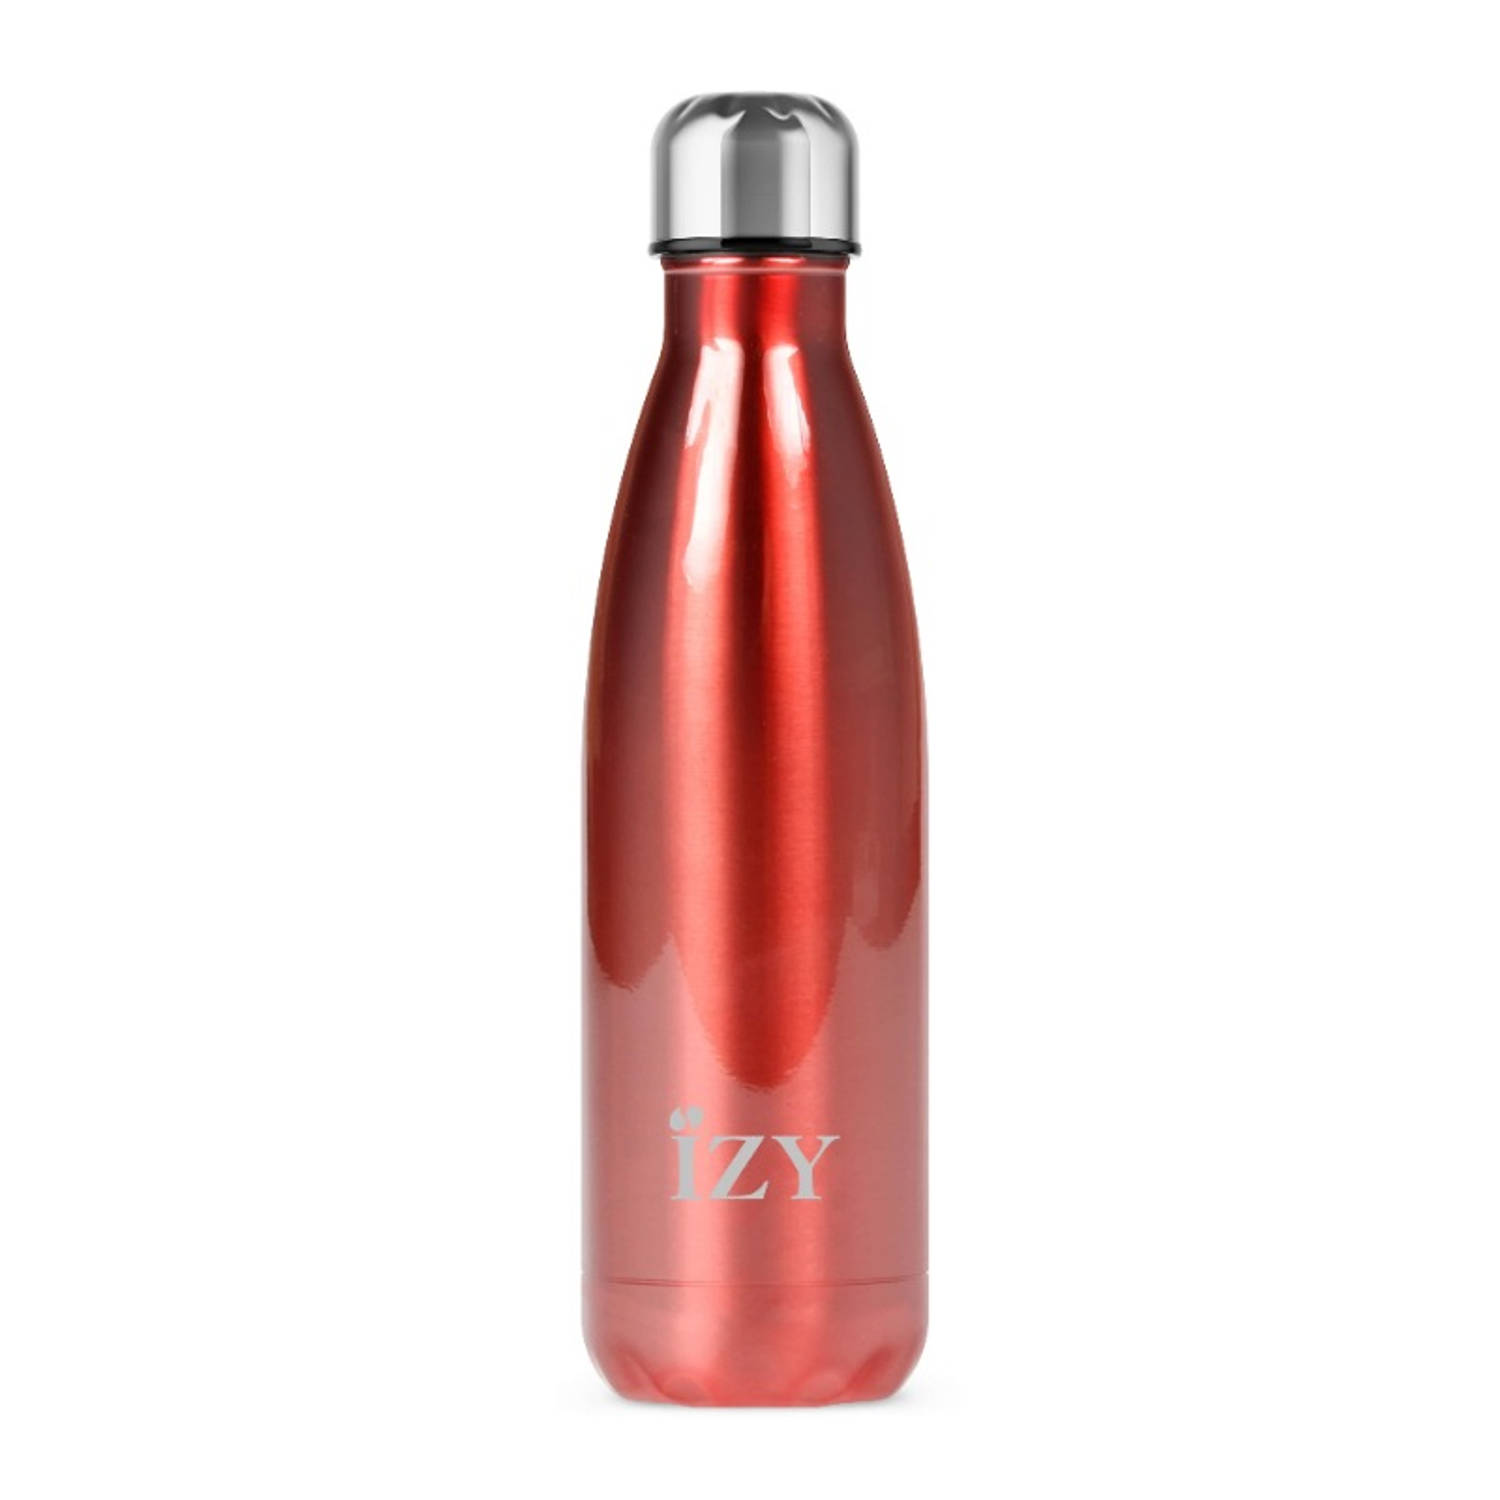 IZY - Thermosfles 0.5L, RVS, Chroom Rood - IZY Original Collection